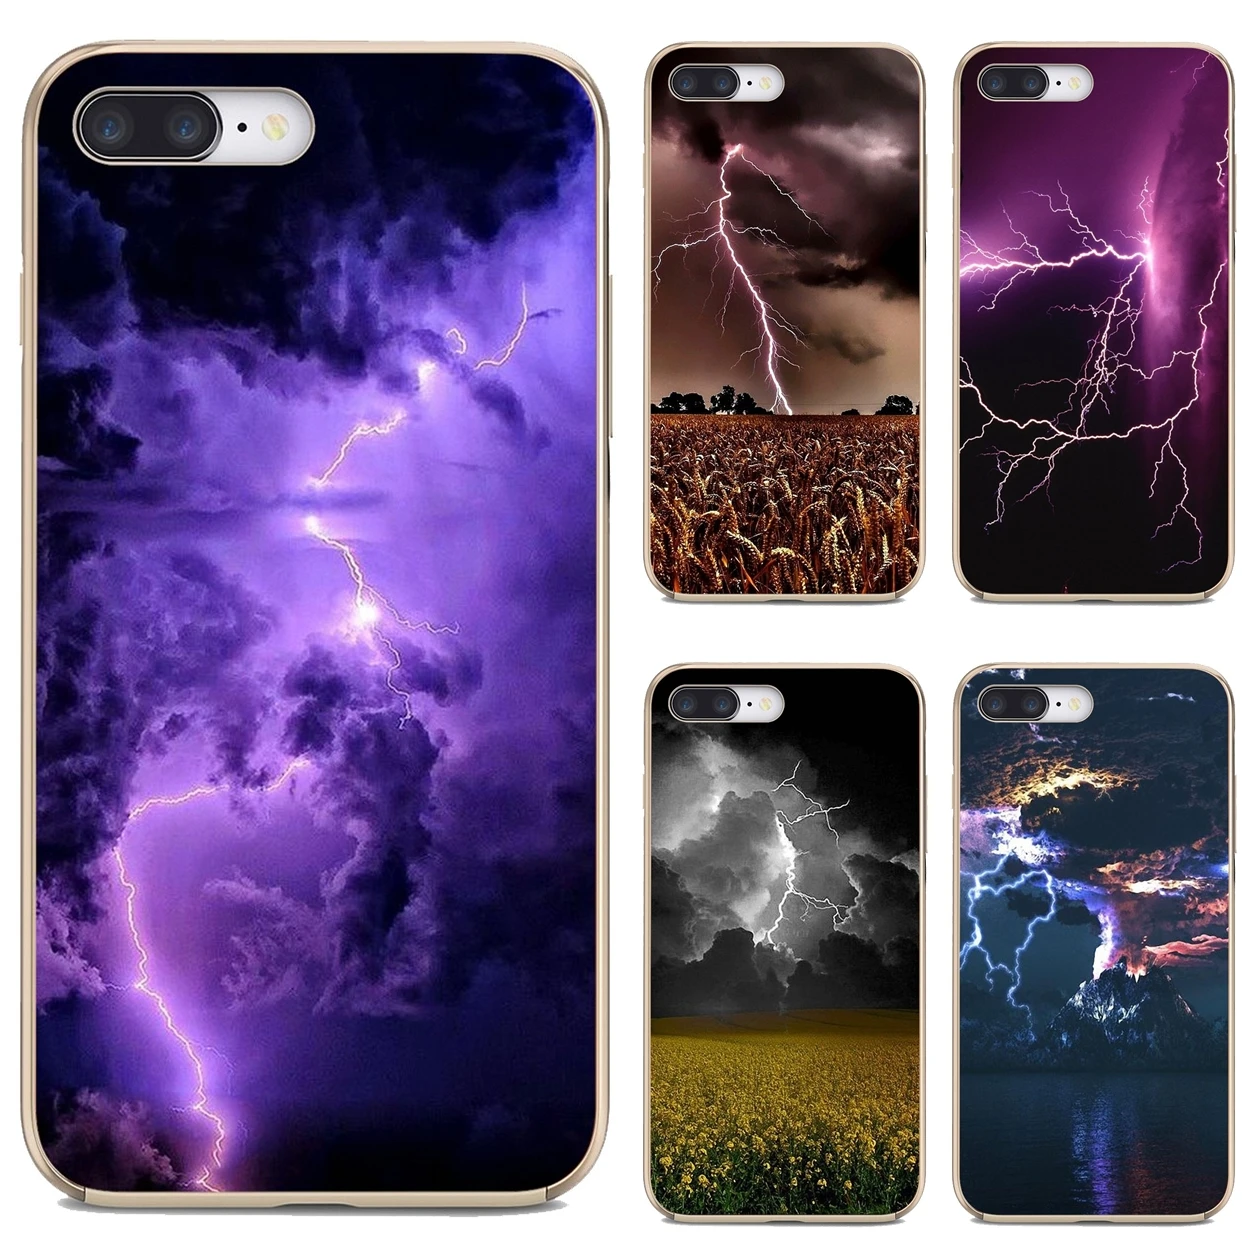 For Xiaomi Pocophone iPod Touch 6 5 F1 For Samsung Galaxy Grand Core Prime Silicone Cases Covers Lightning-storm-Mother-Nature